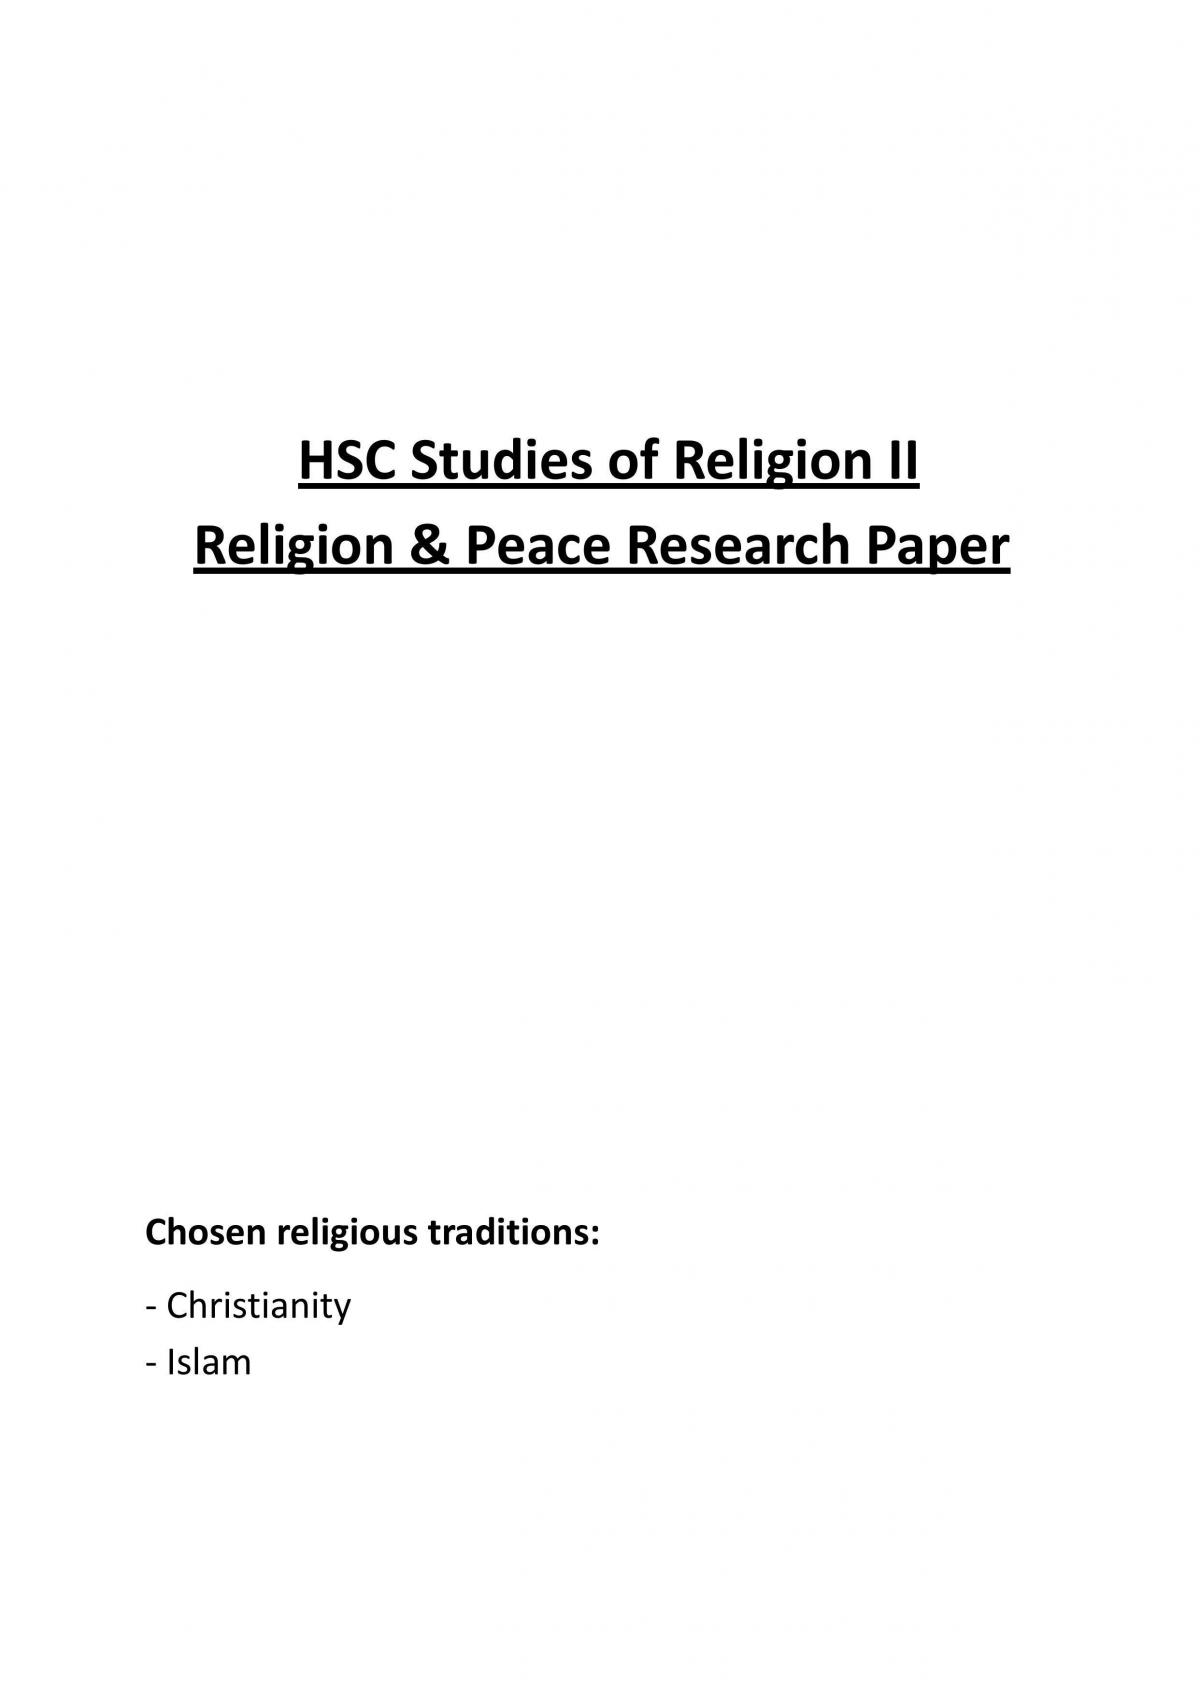 religion and peace essay hsc